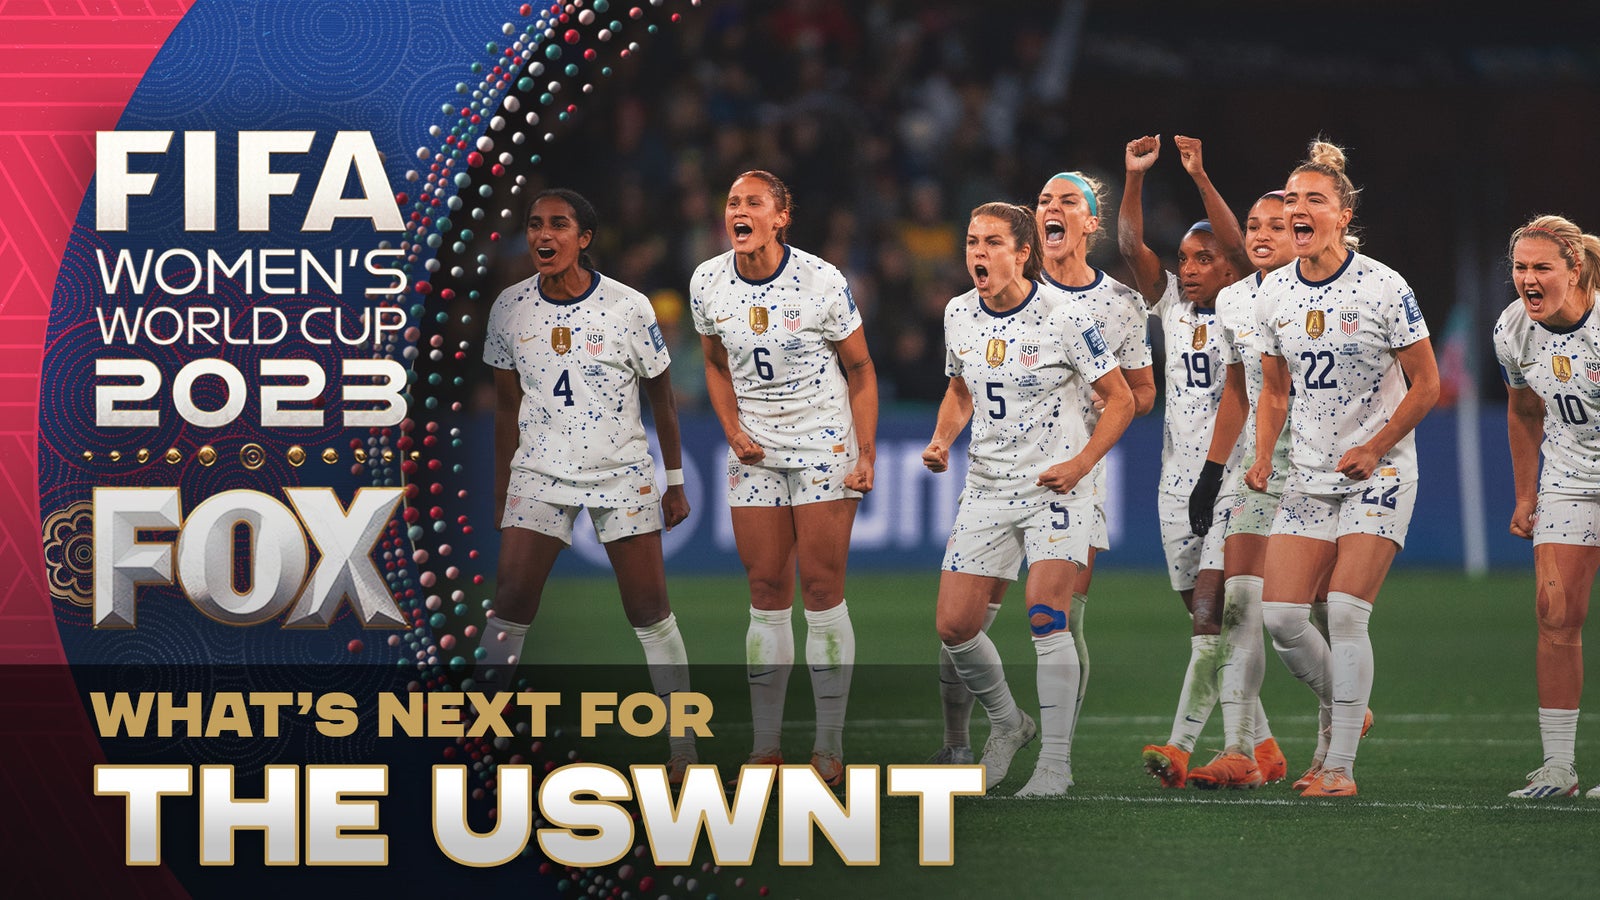 What's next for USWNT? | 2023 FIFA Women's World Cup